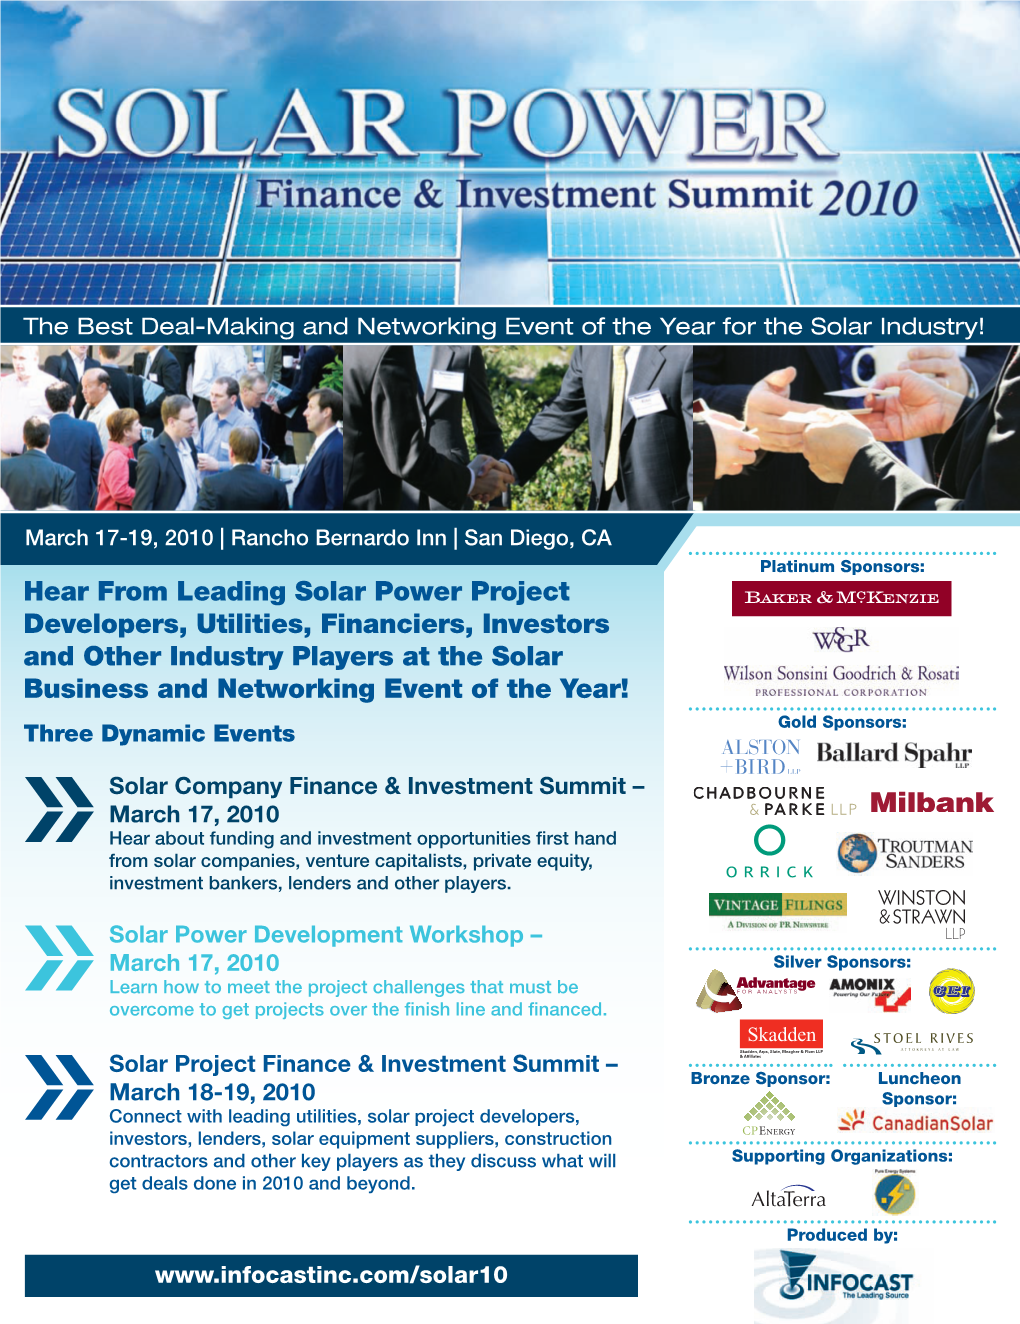 Solar Project Finance & Investment Summit